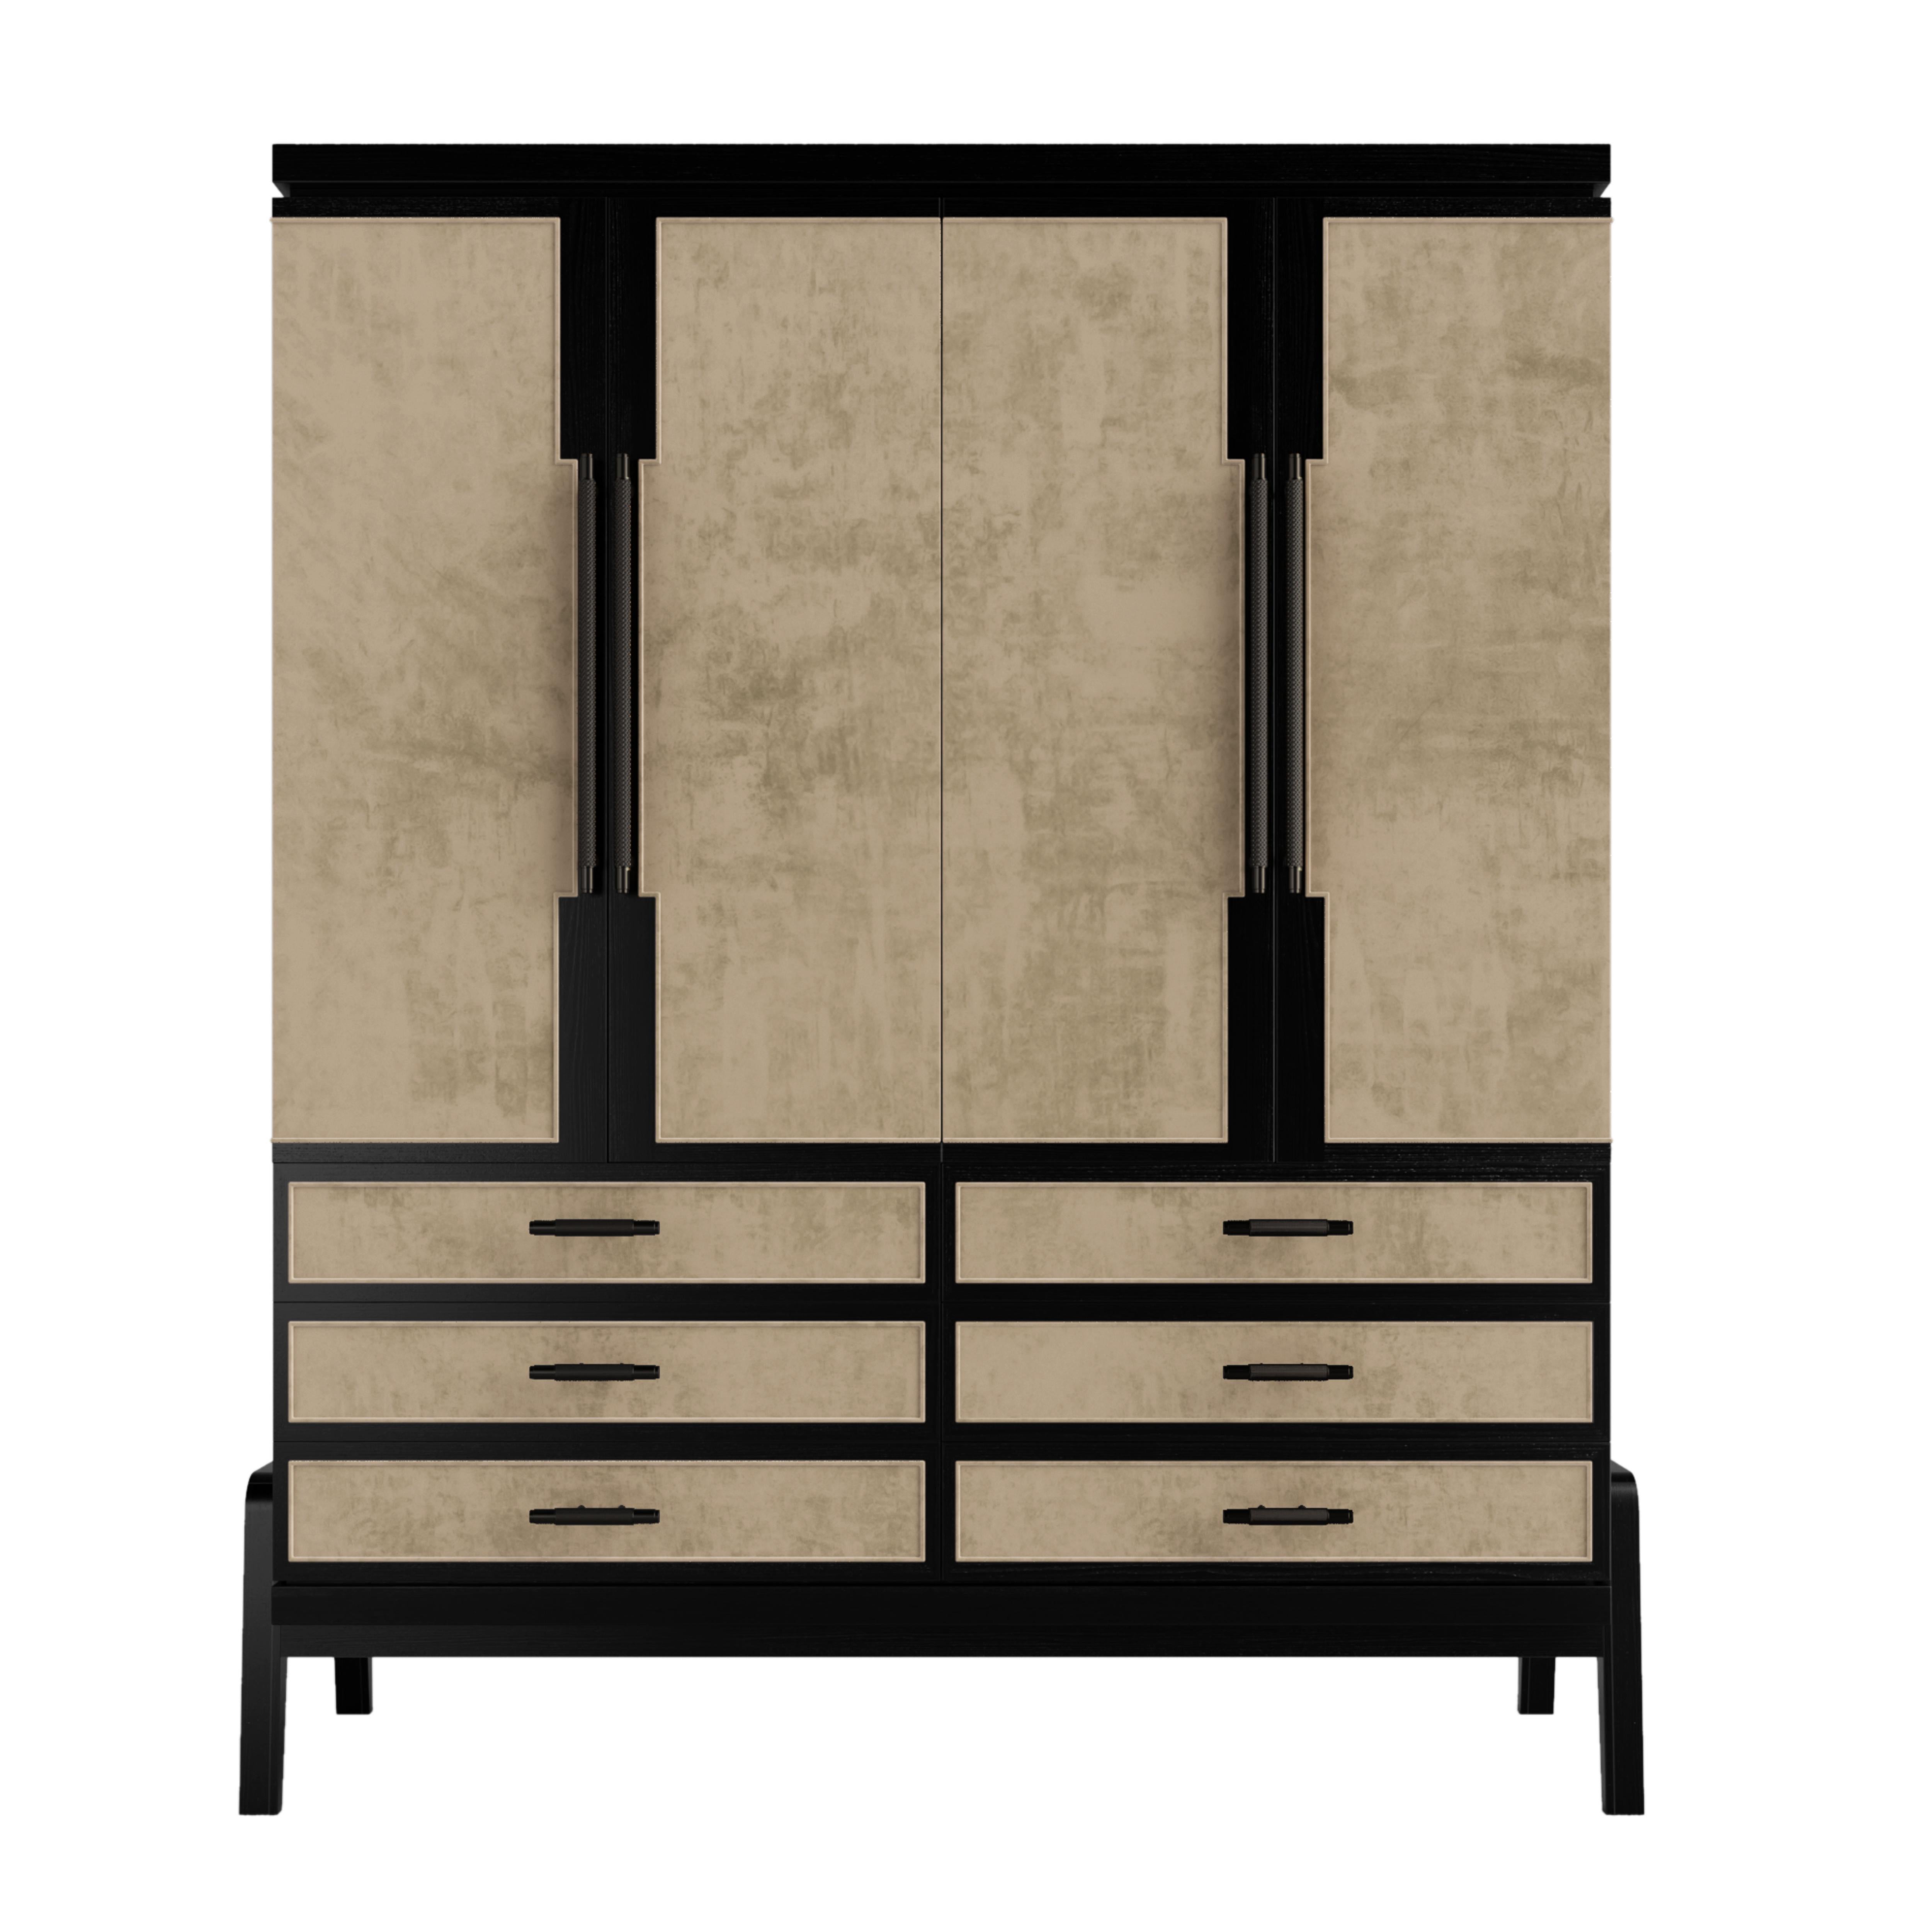 Indulge in the ultimate wardrobe experience with the all-new Cupid Wardrobe II! This sophisticated masterpiece offers a wider and larger storage capacity with six spacious drawers, perfect for all your storage needs. The finest Black American Walnut